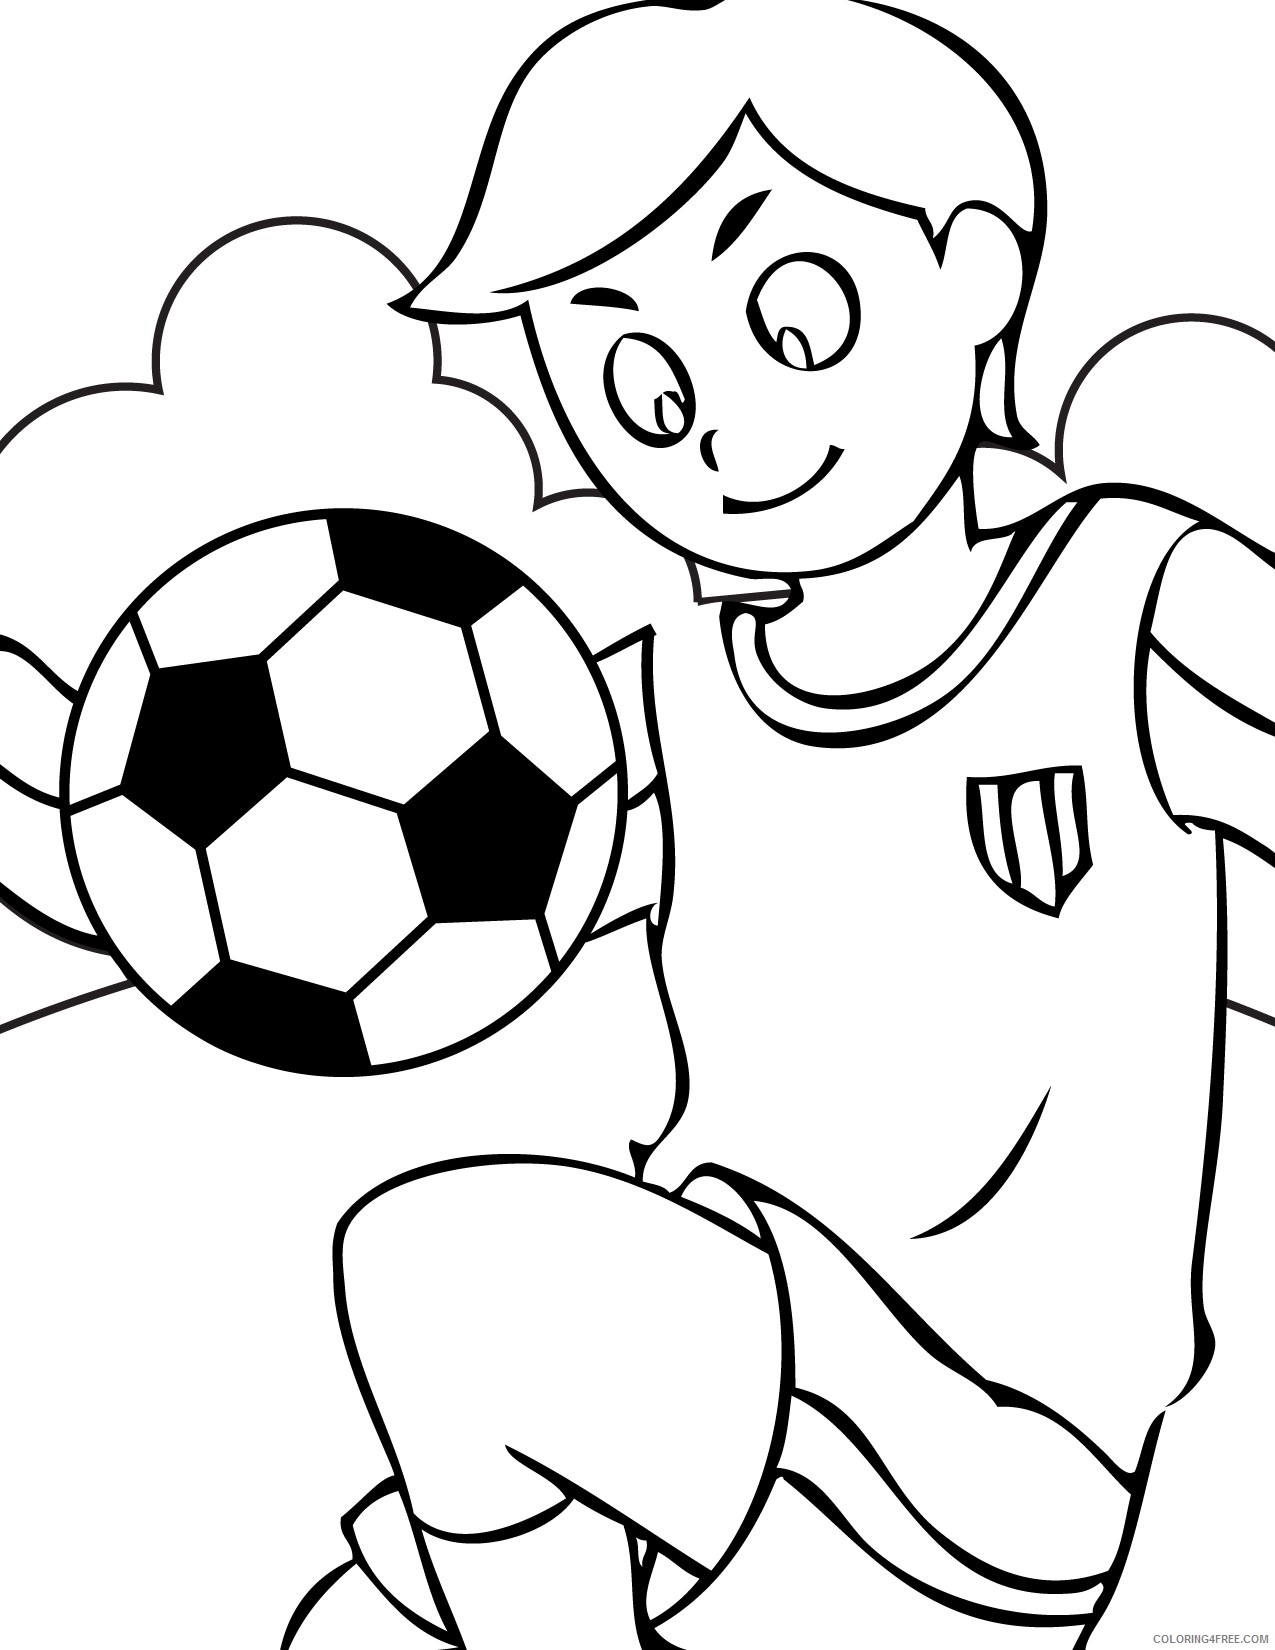 sports coloring pages soccer Coloring4free